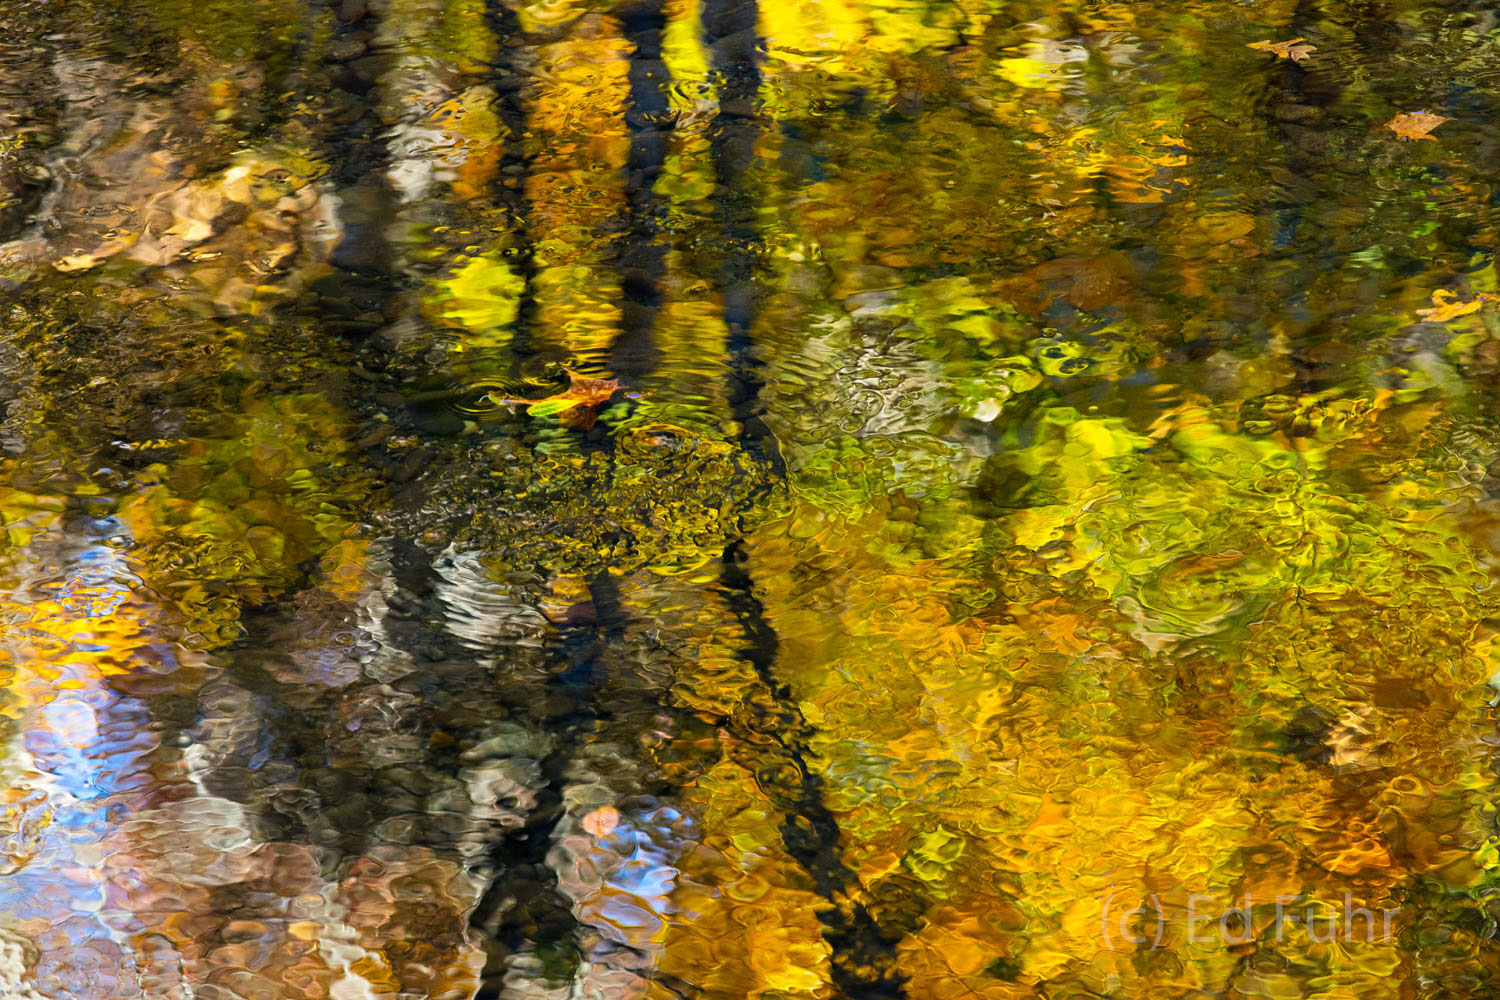 Autumn's splendor reflects in the still waters of the Little River.